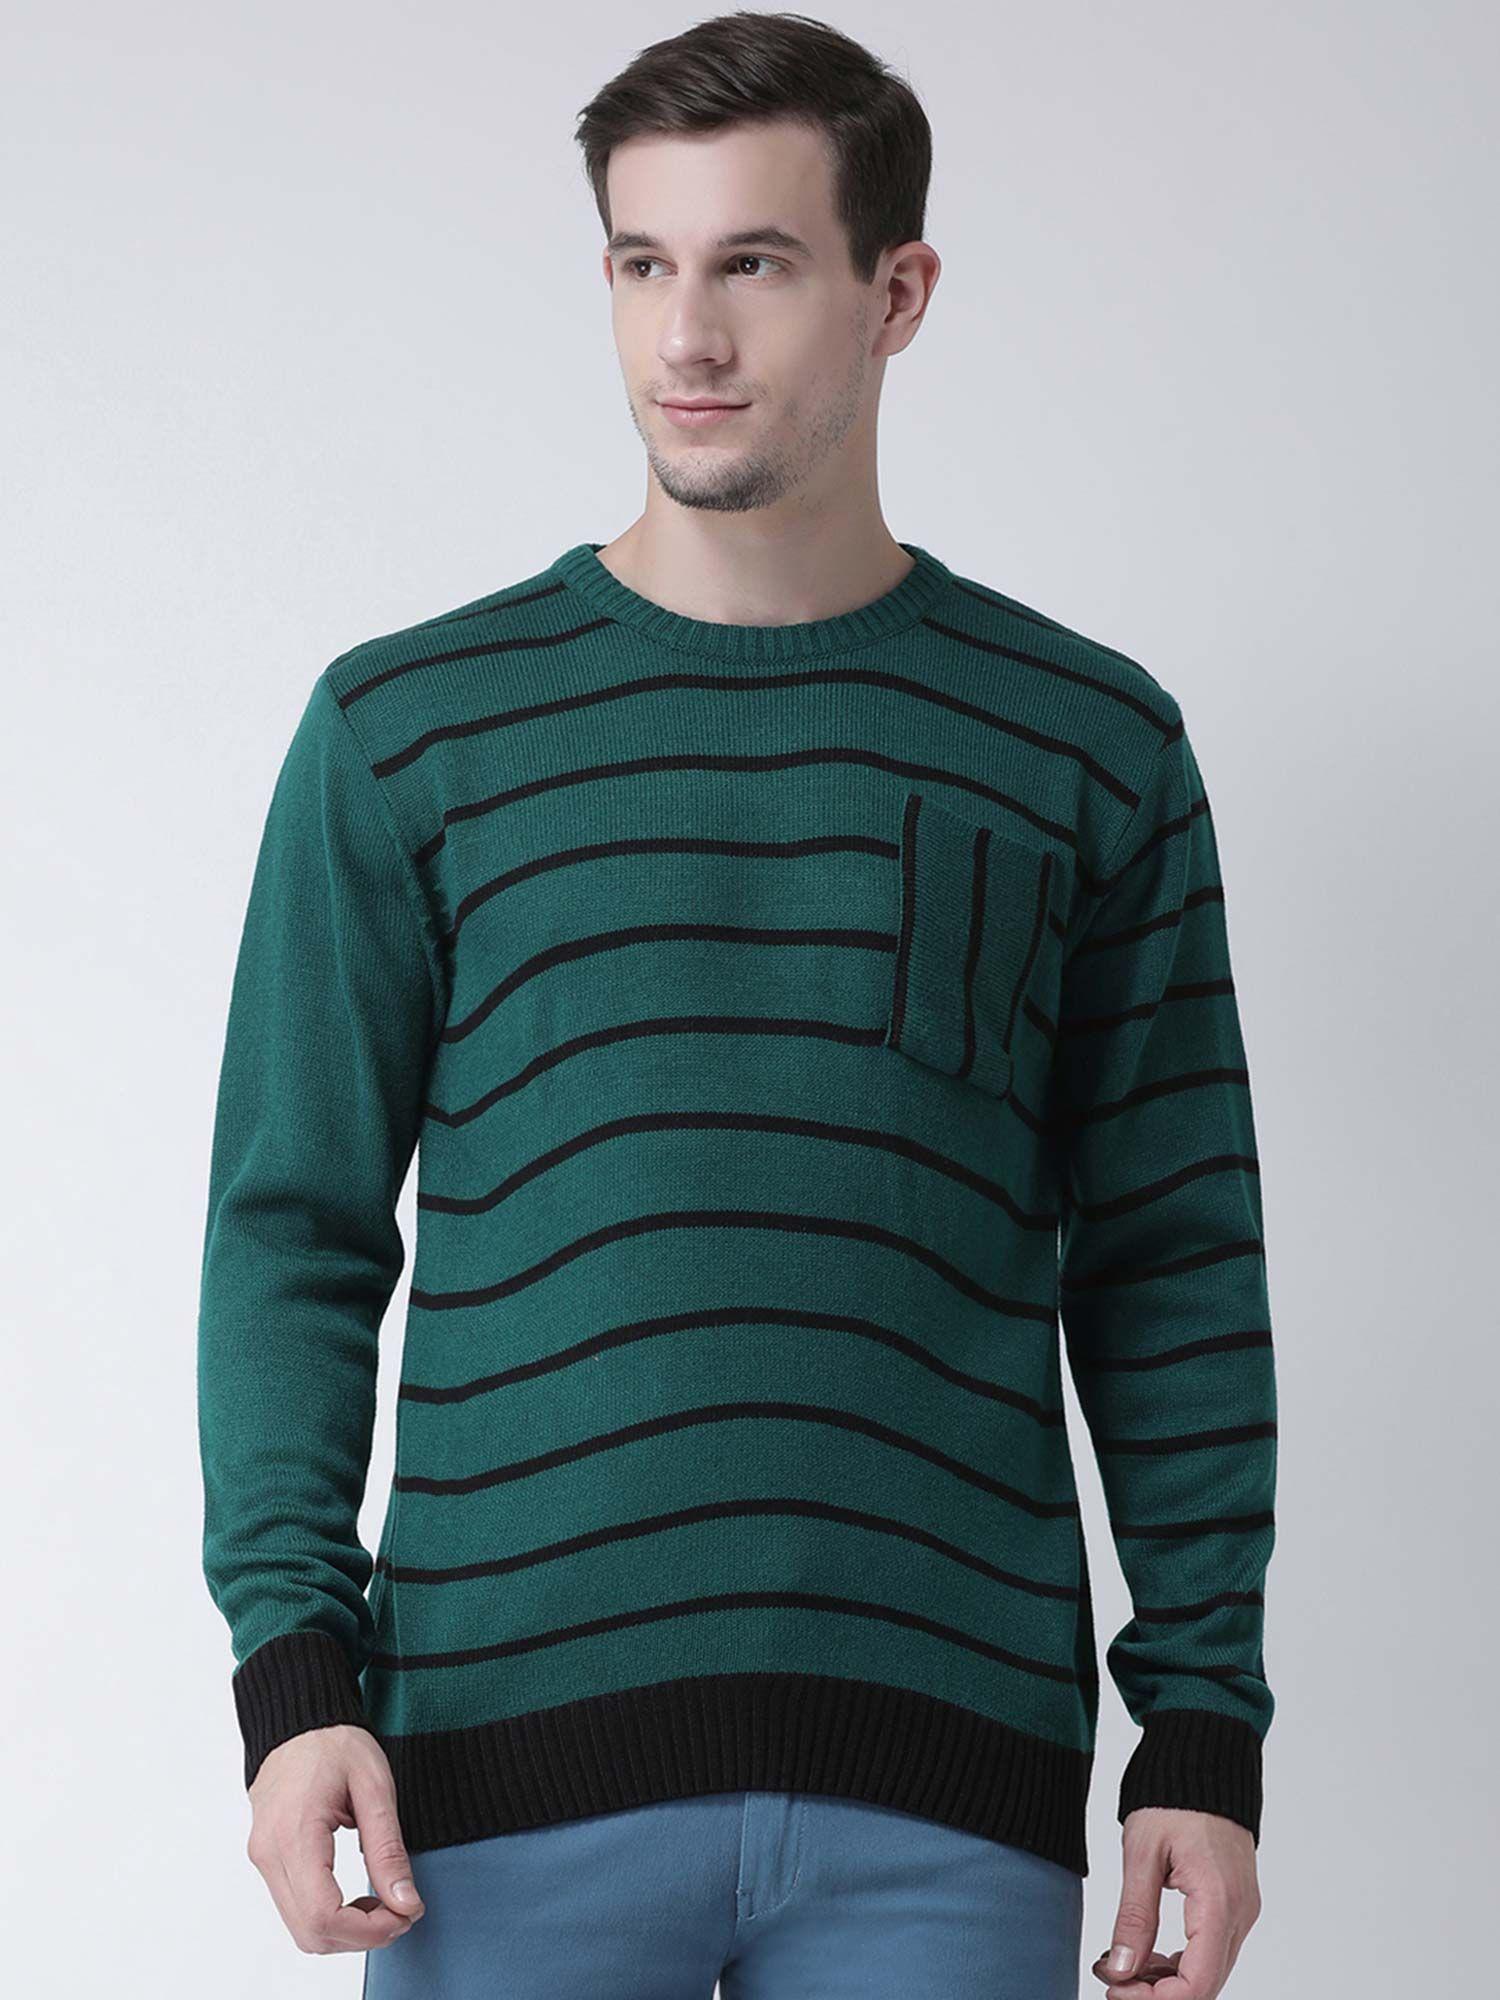 Men Teal Striped Pullover Sweater